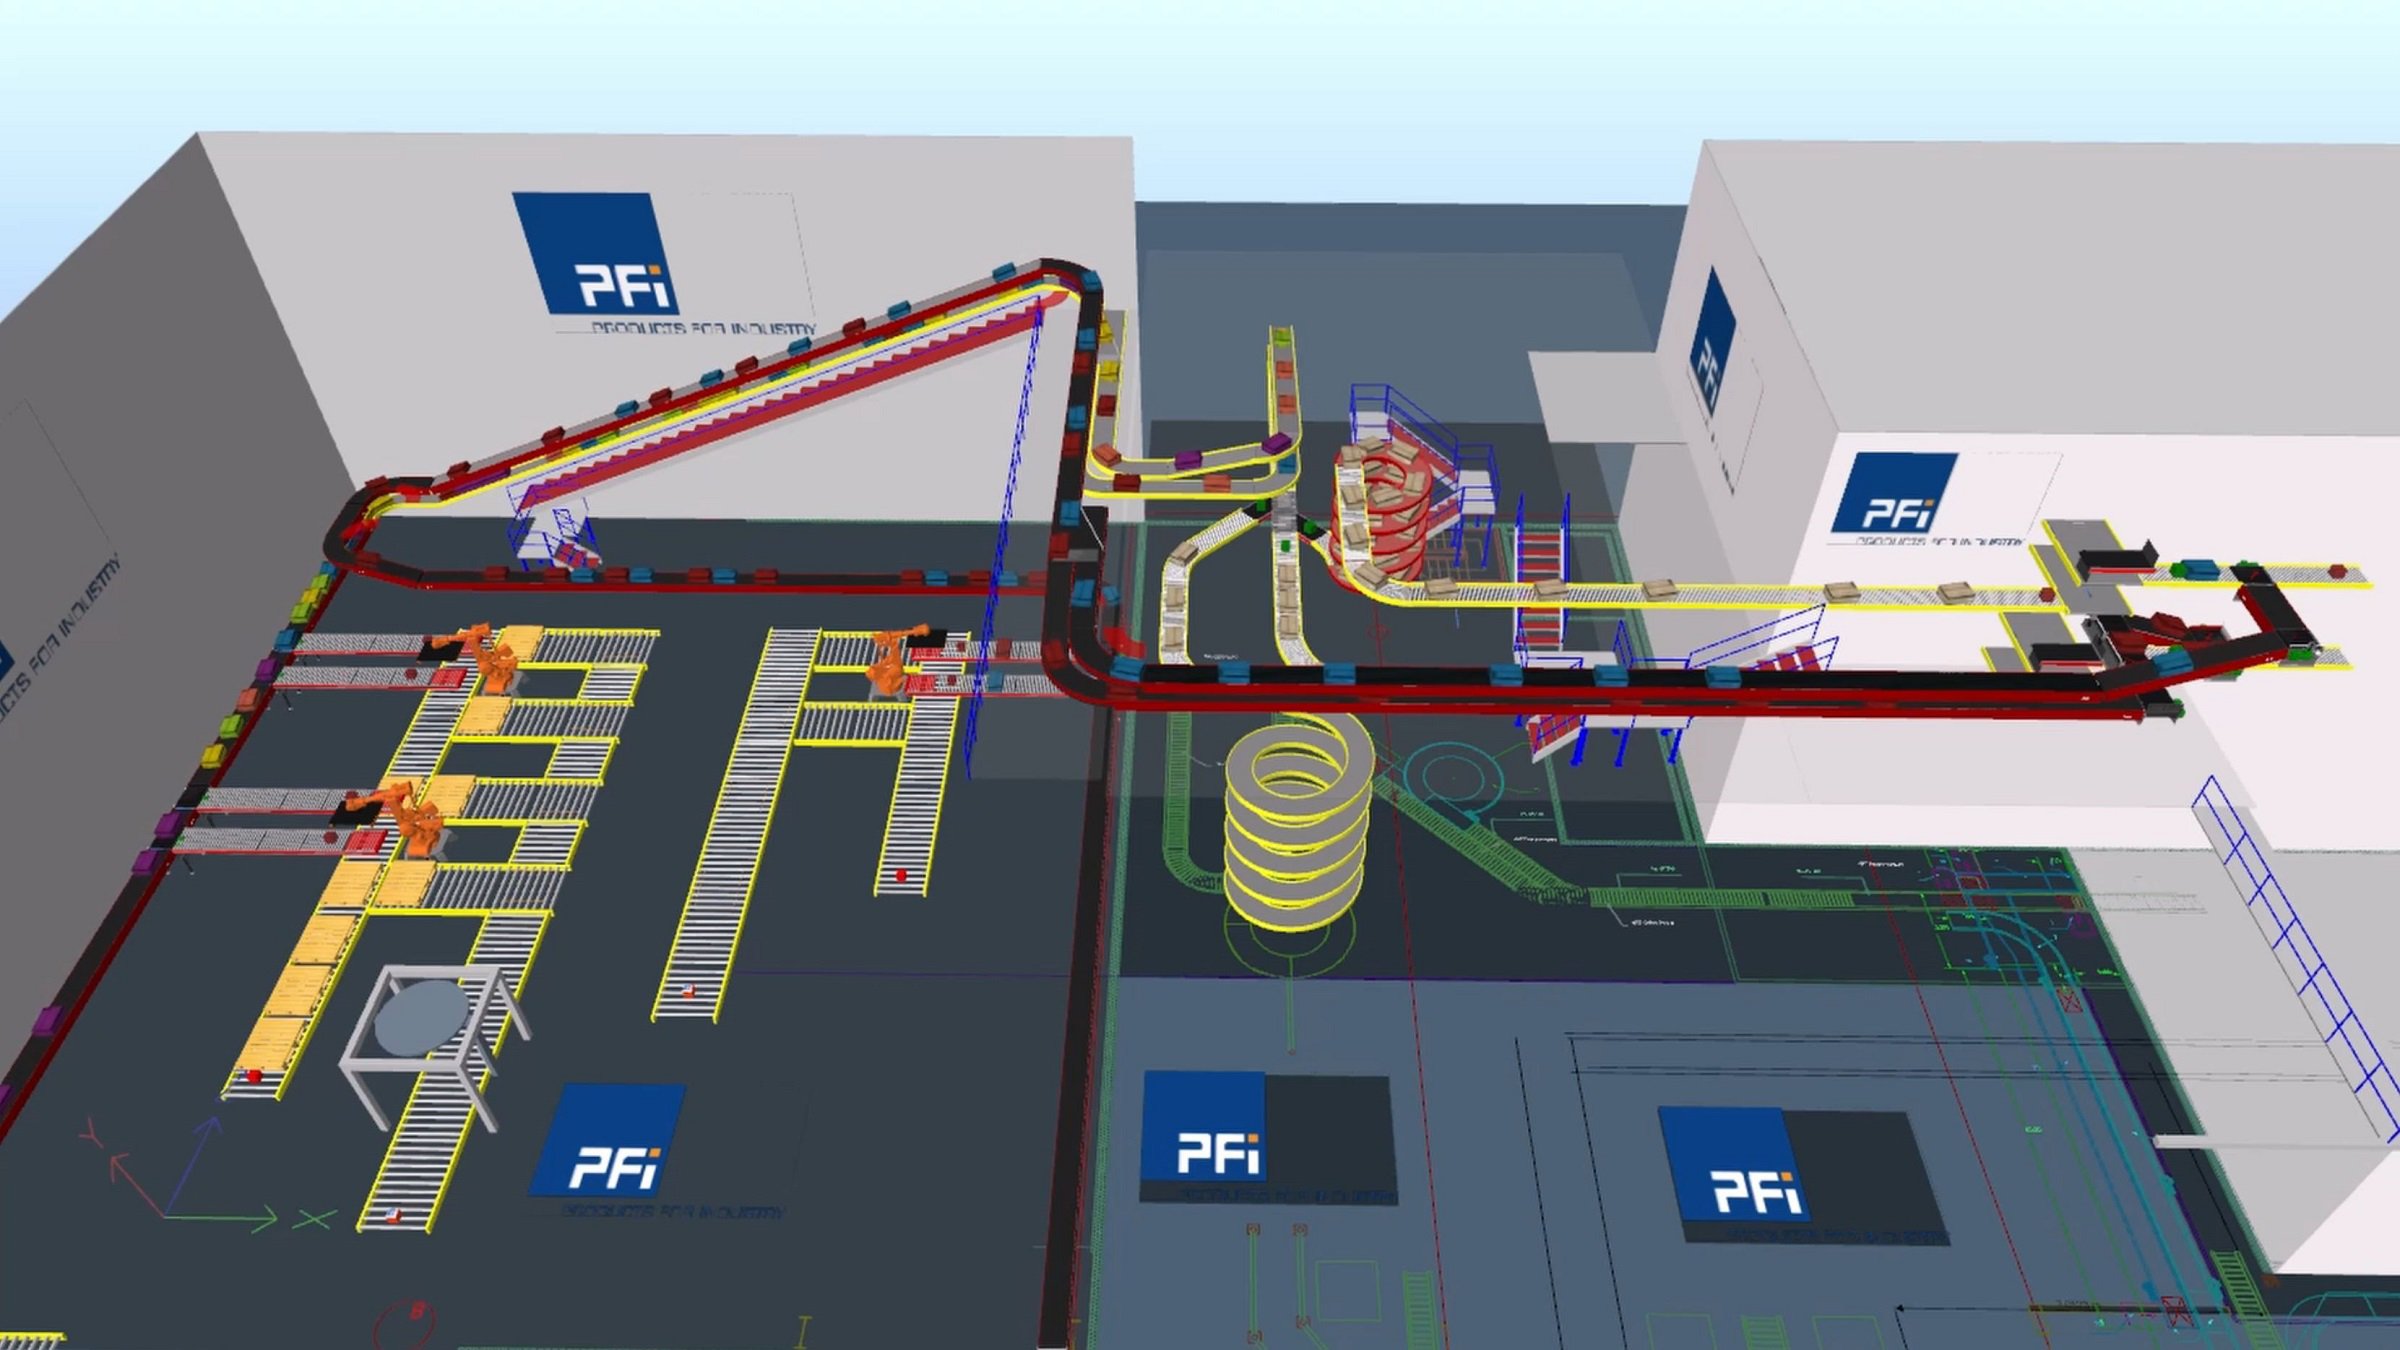 Emulate3D enables PFi to create an accurate visualisation of customer’s plant and automation equipment, and simulate its operations with true-to-life physics